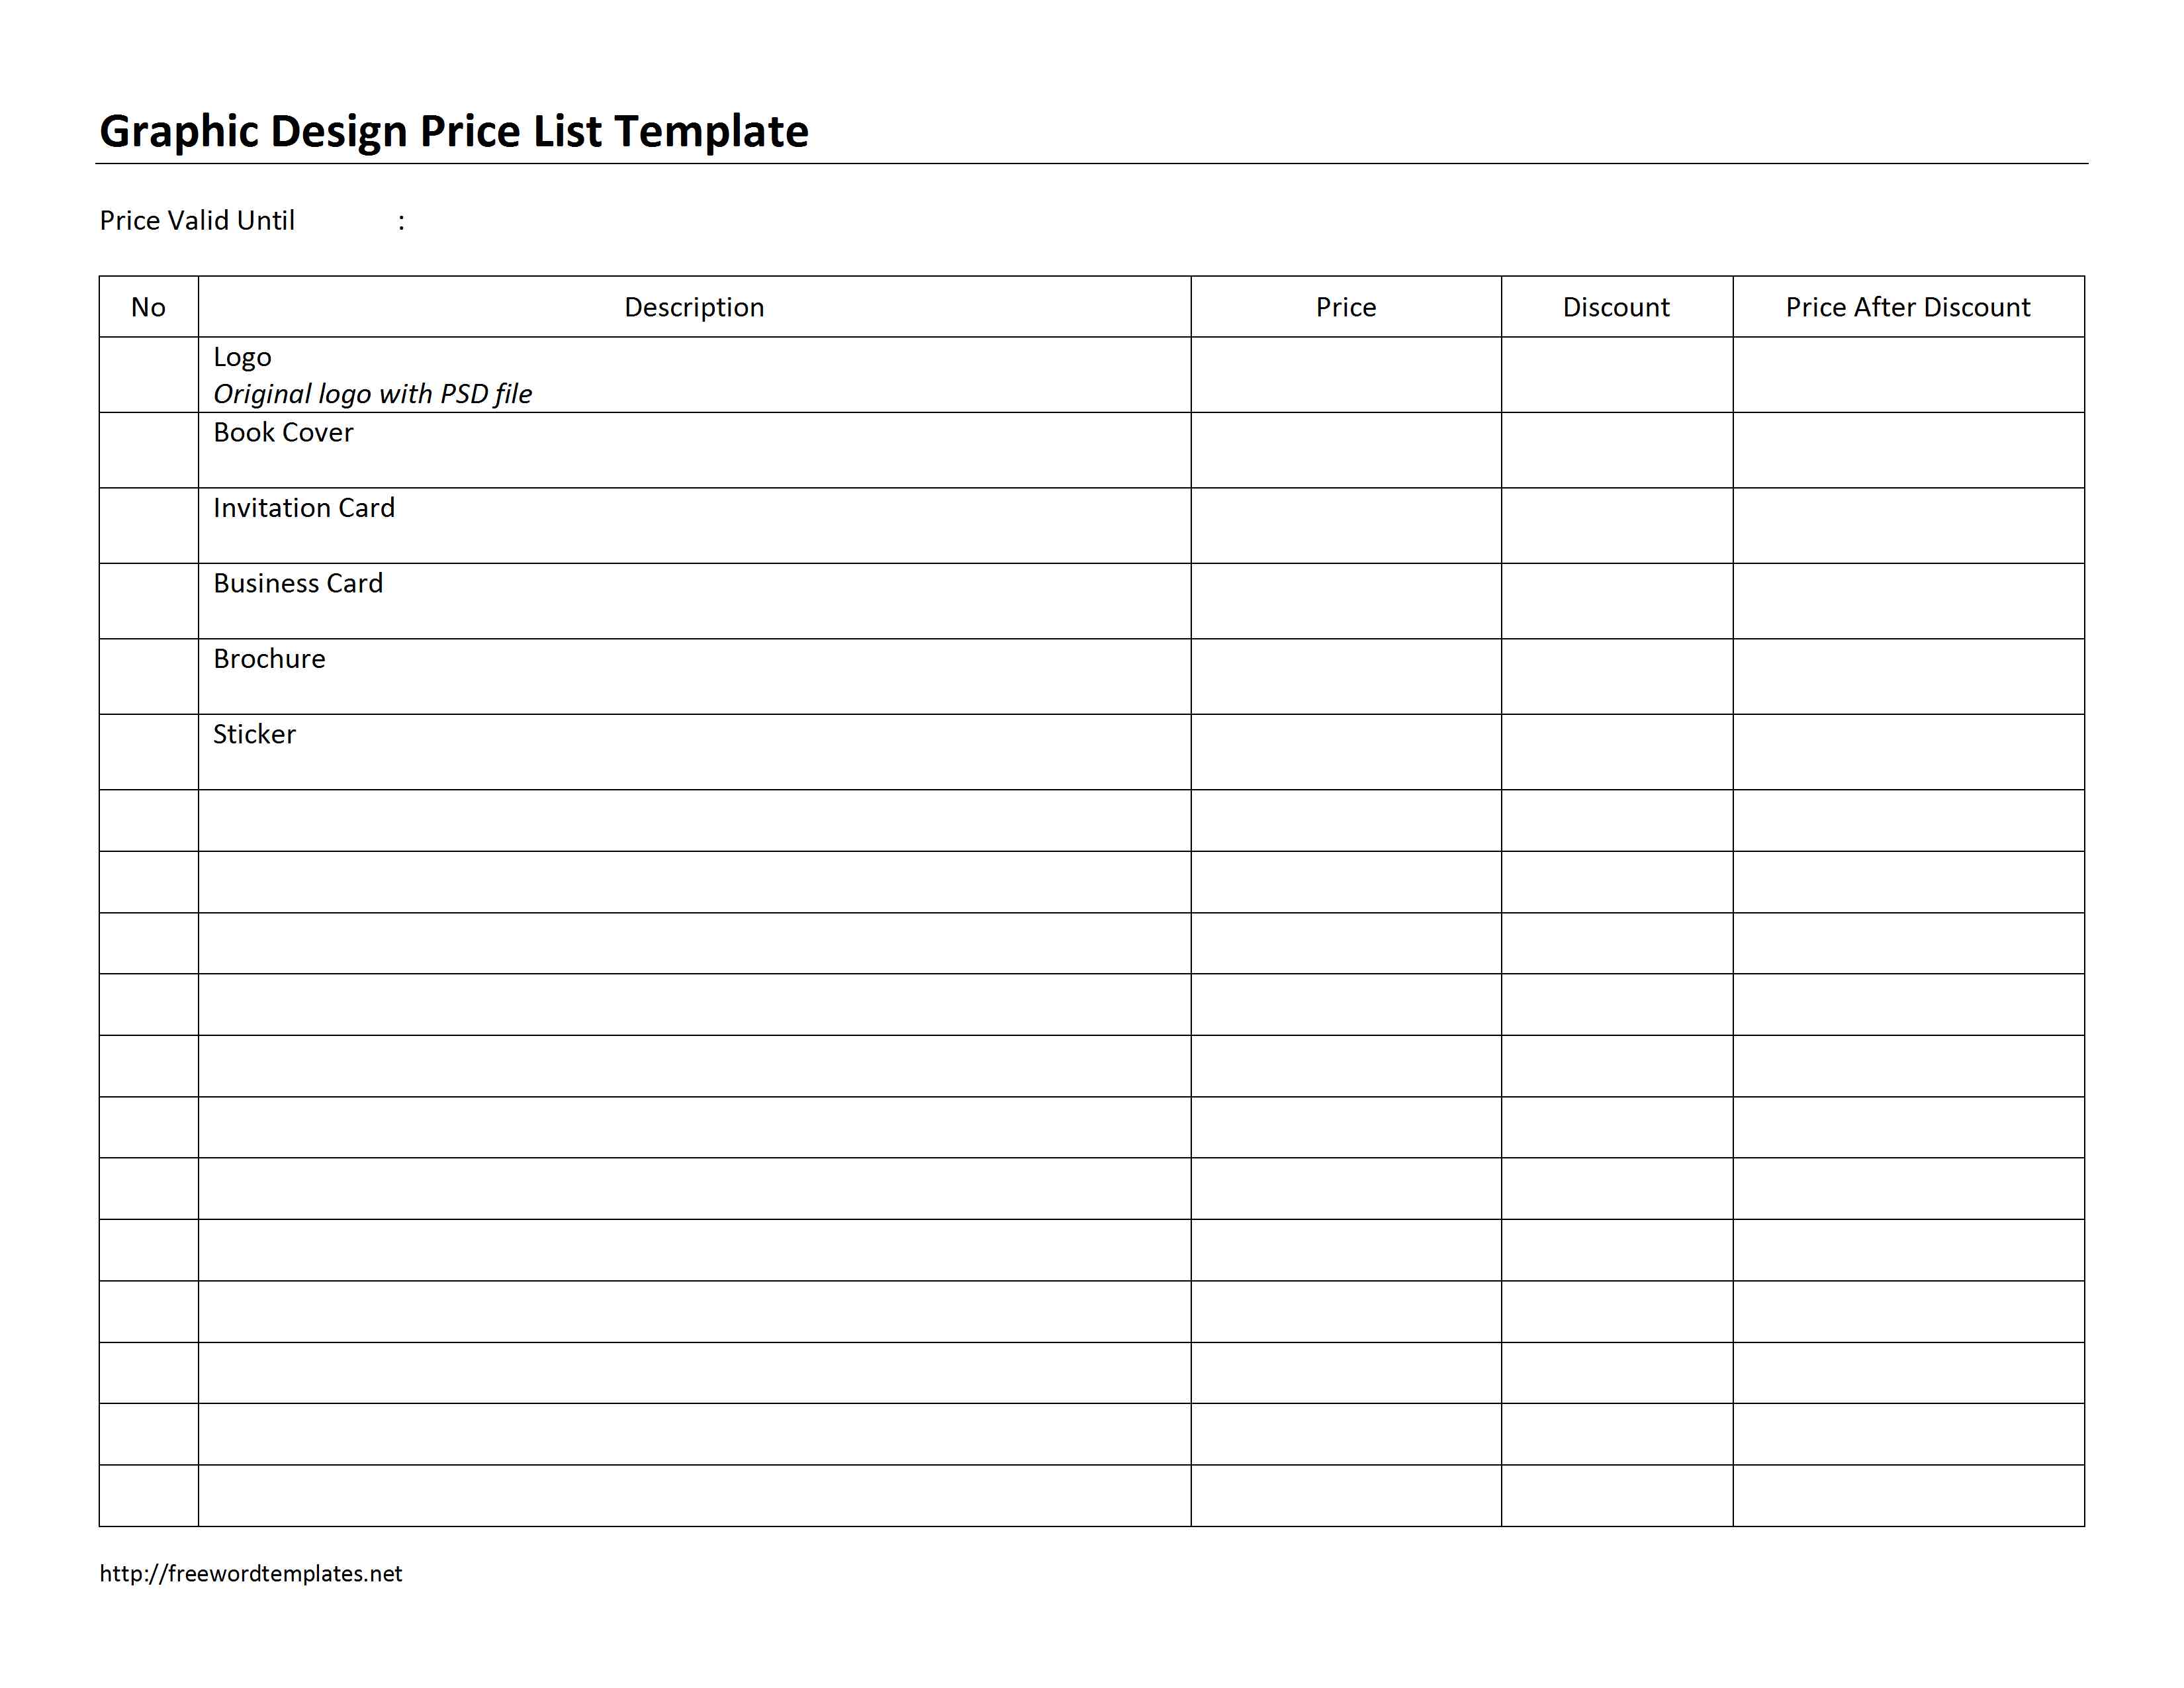 Graphic Design Price List Template for Microsoft Word